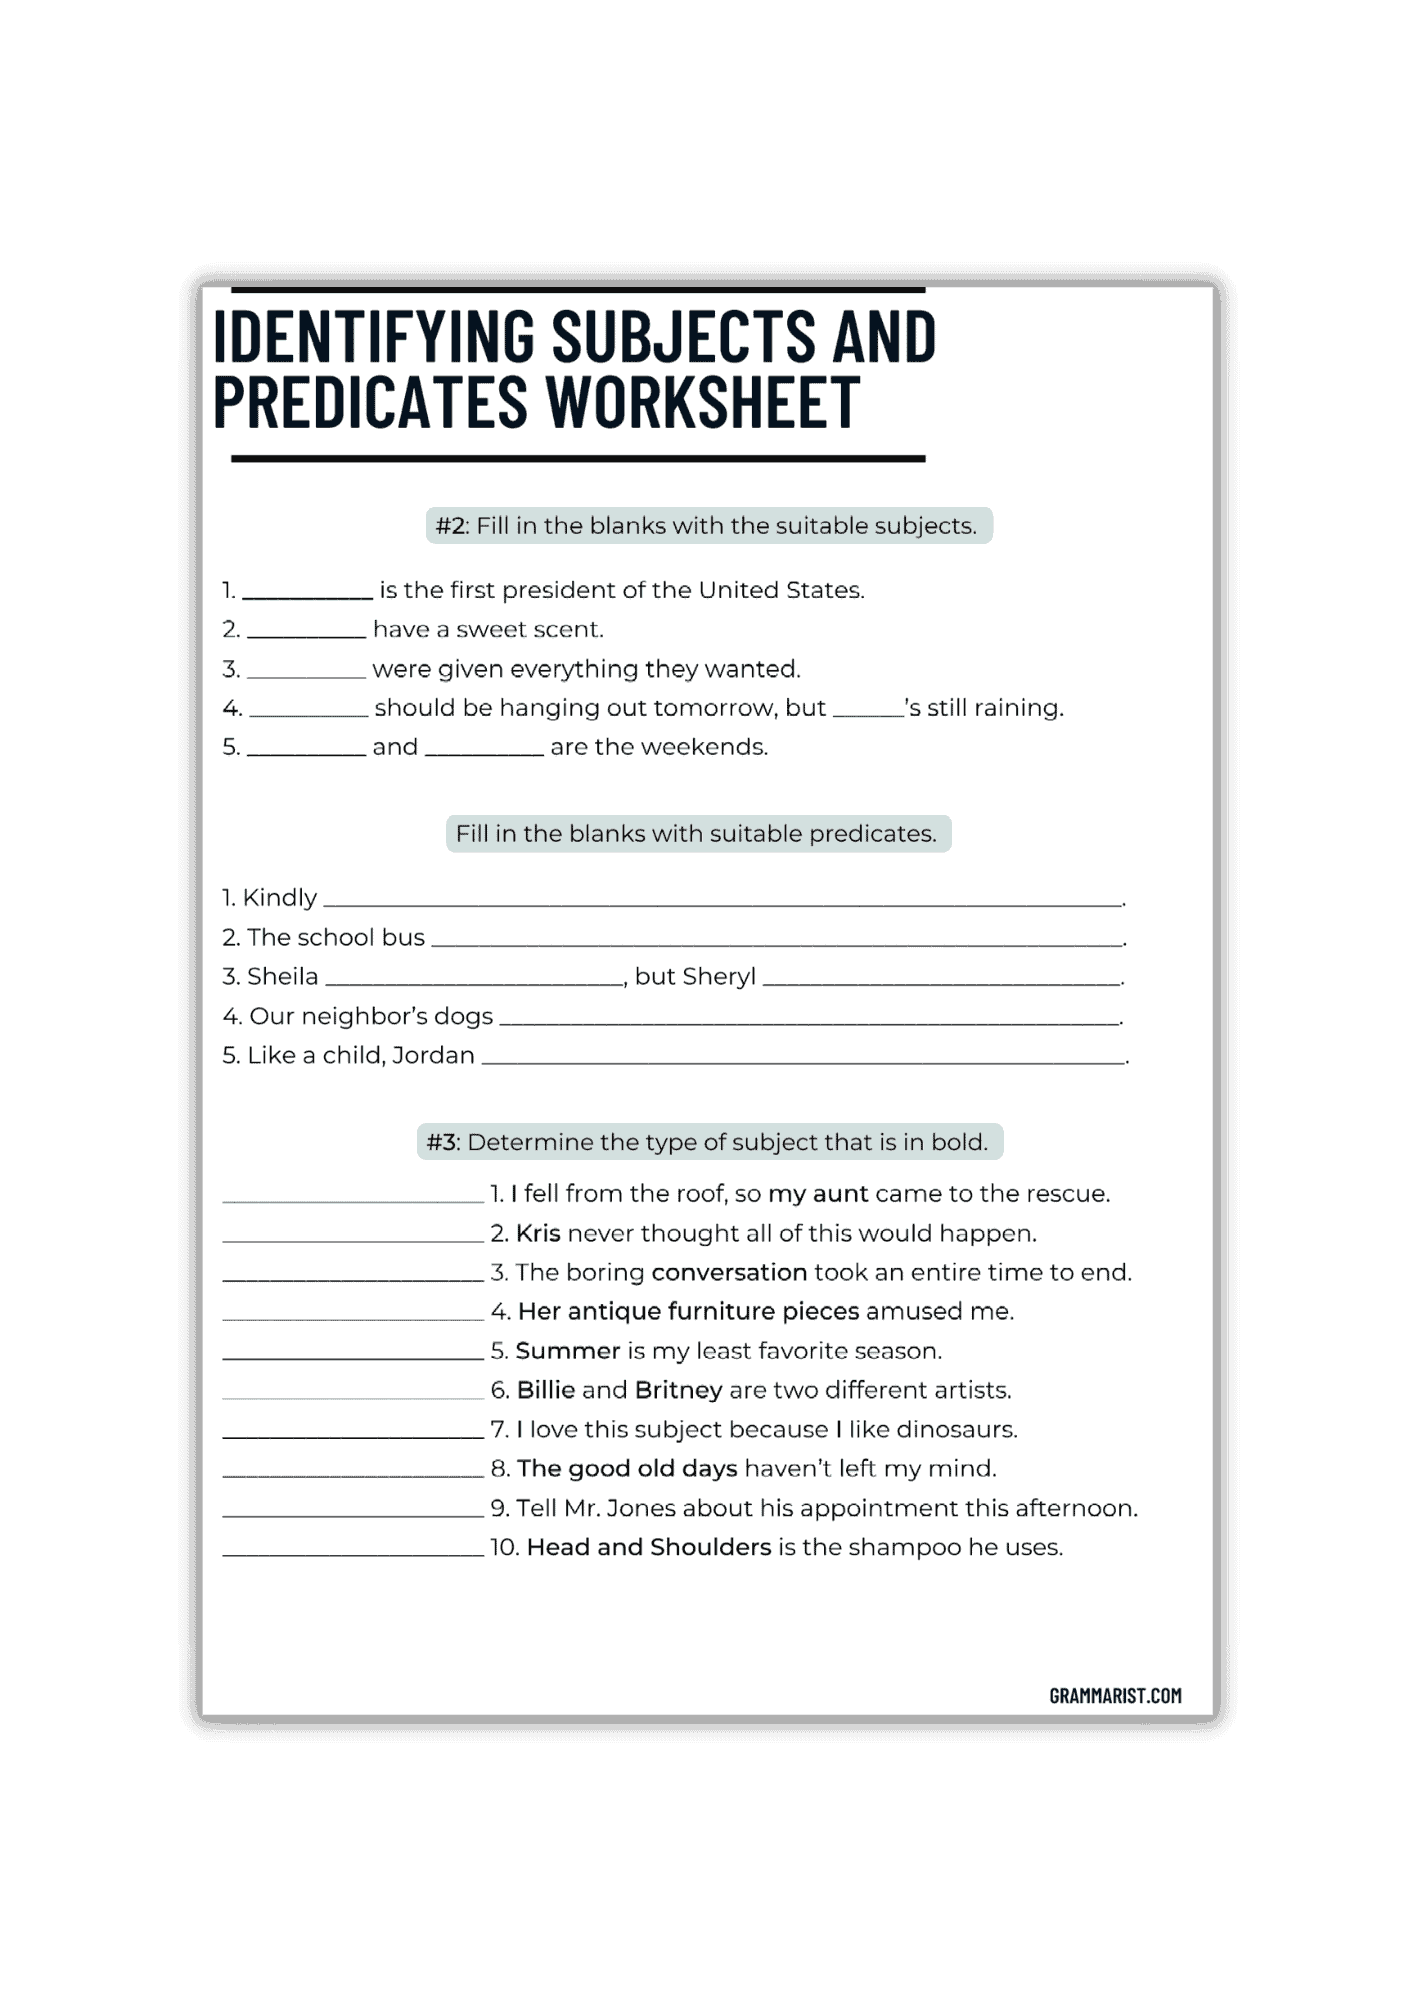 Identifying-Subjects-and-Predicates-PDF-3-